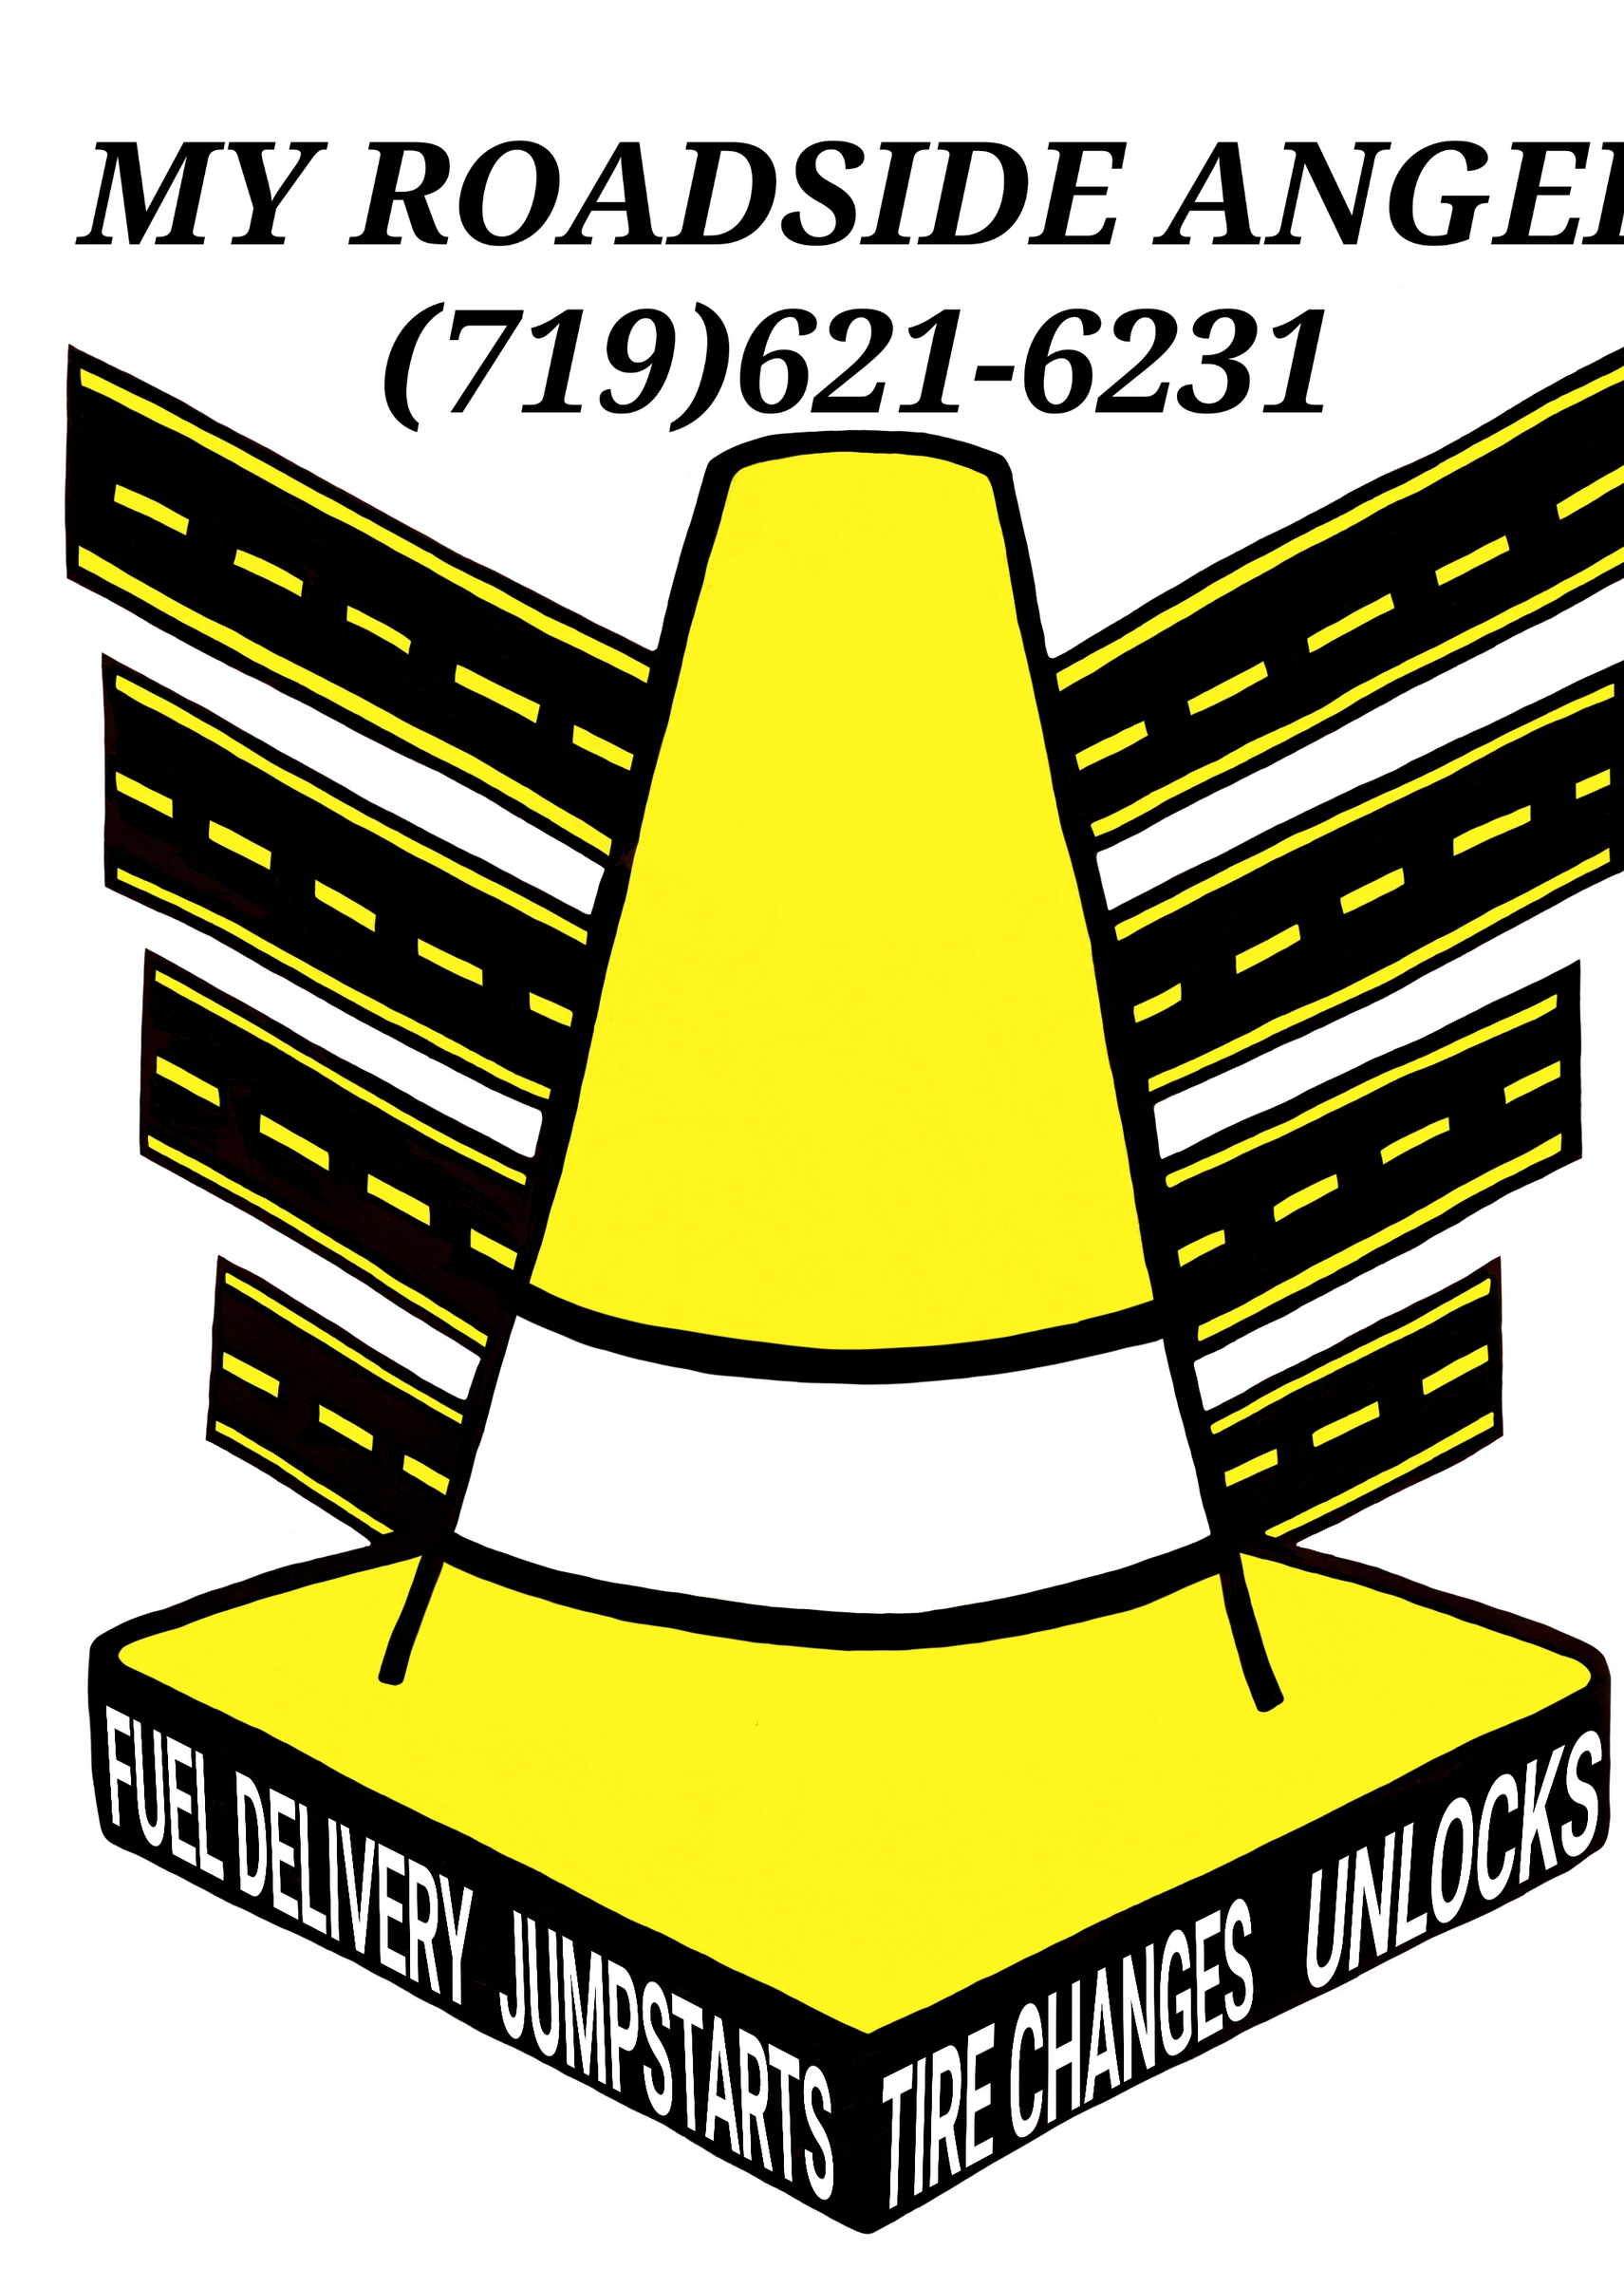 My Roadside Angel. Yellow Safety Cone logo..24 Hour Roadside Assistance in Colorado Springs. 